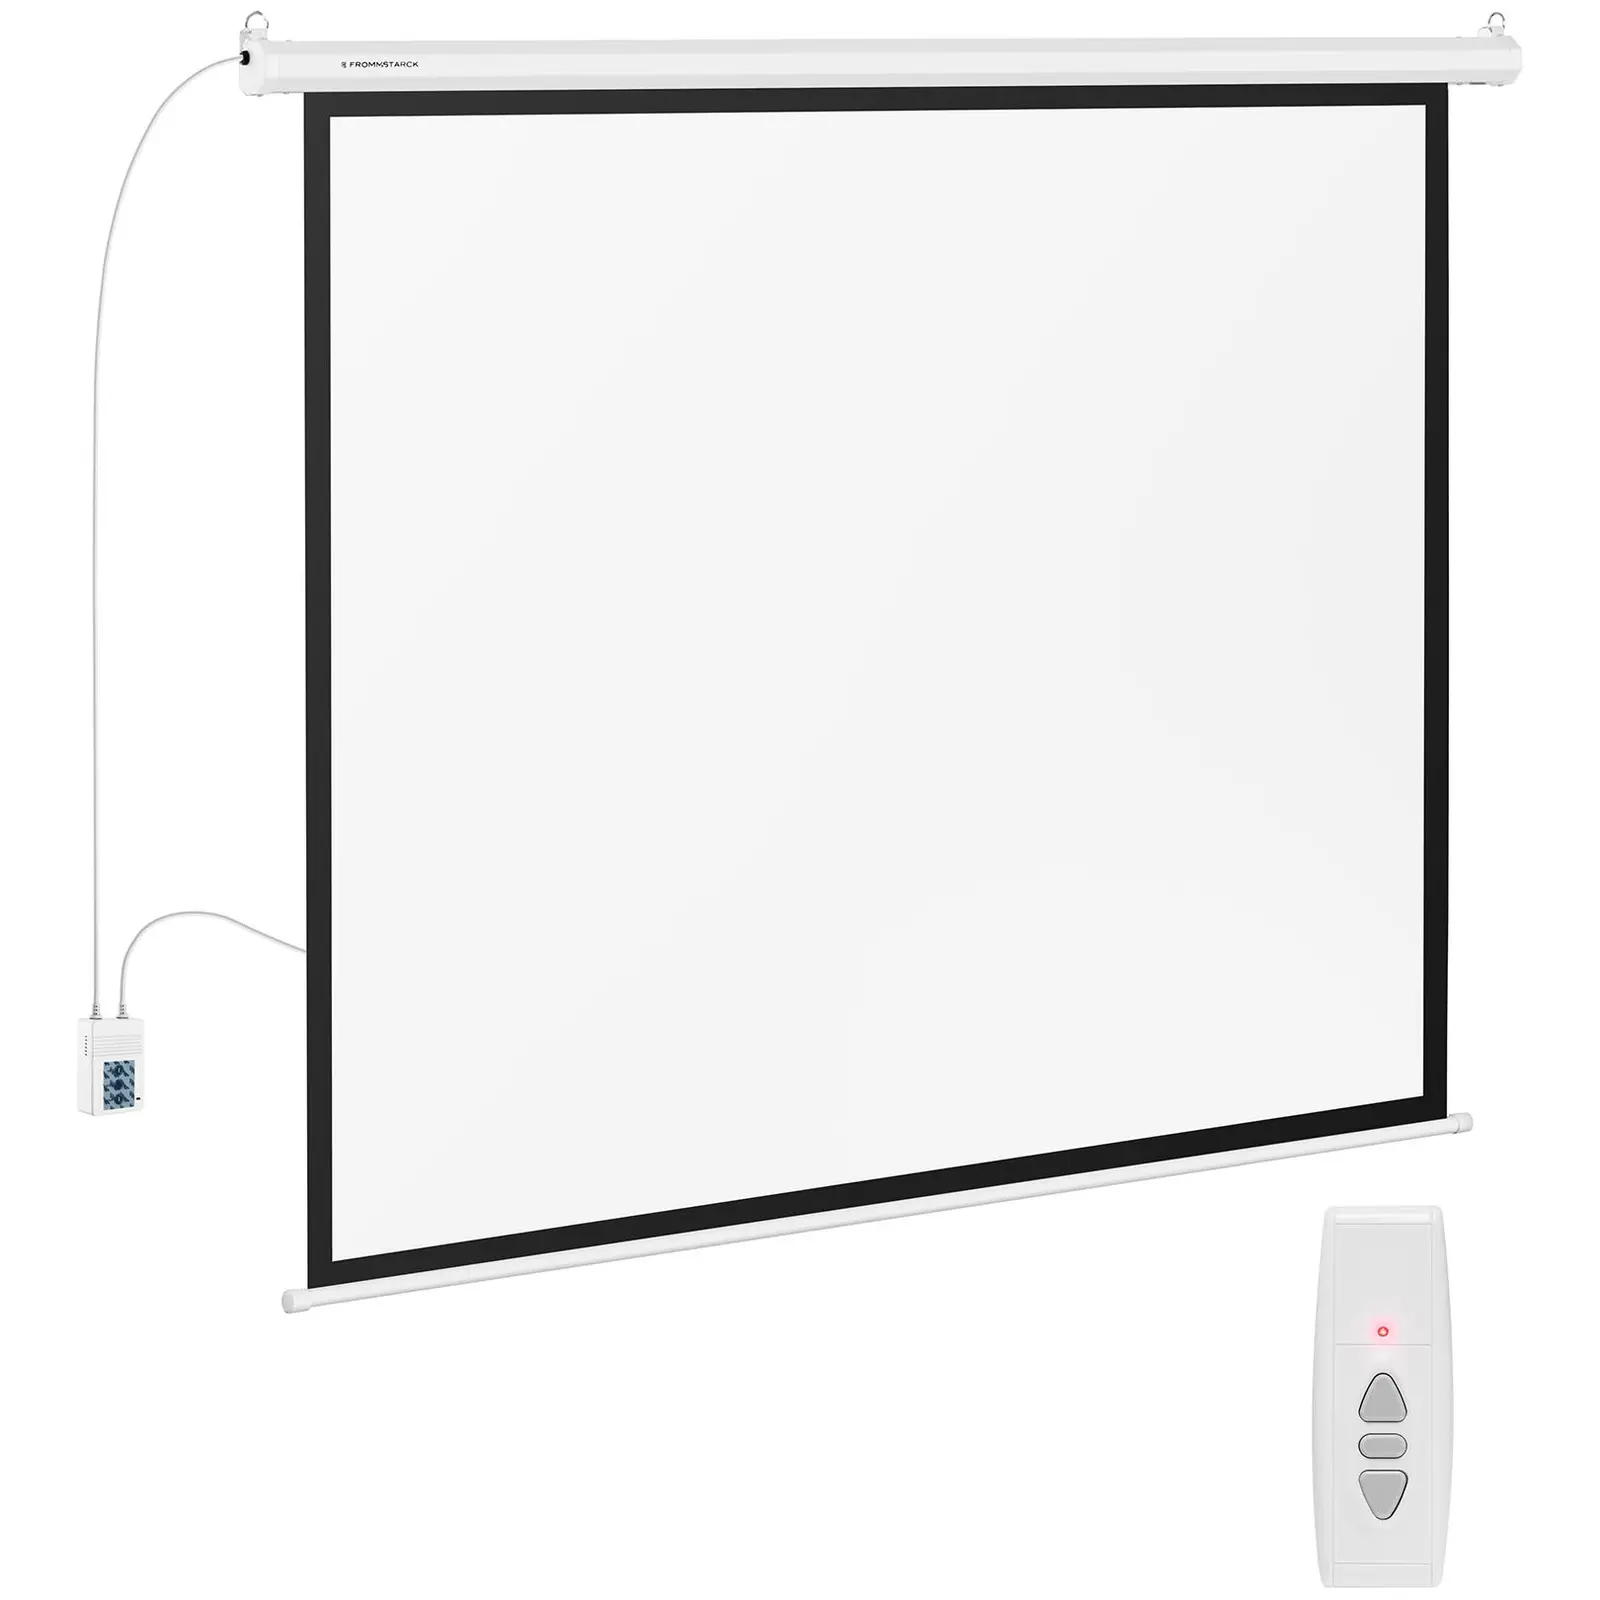 Projection Screen 177 x 134 cm 4:3 - Electric Projection Screens by Fromm & Starck